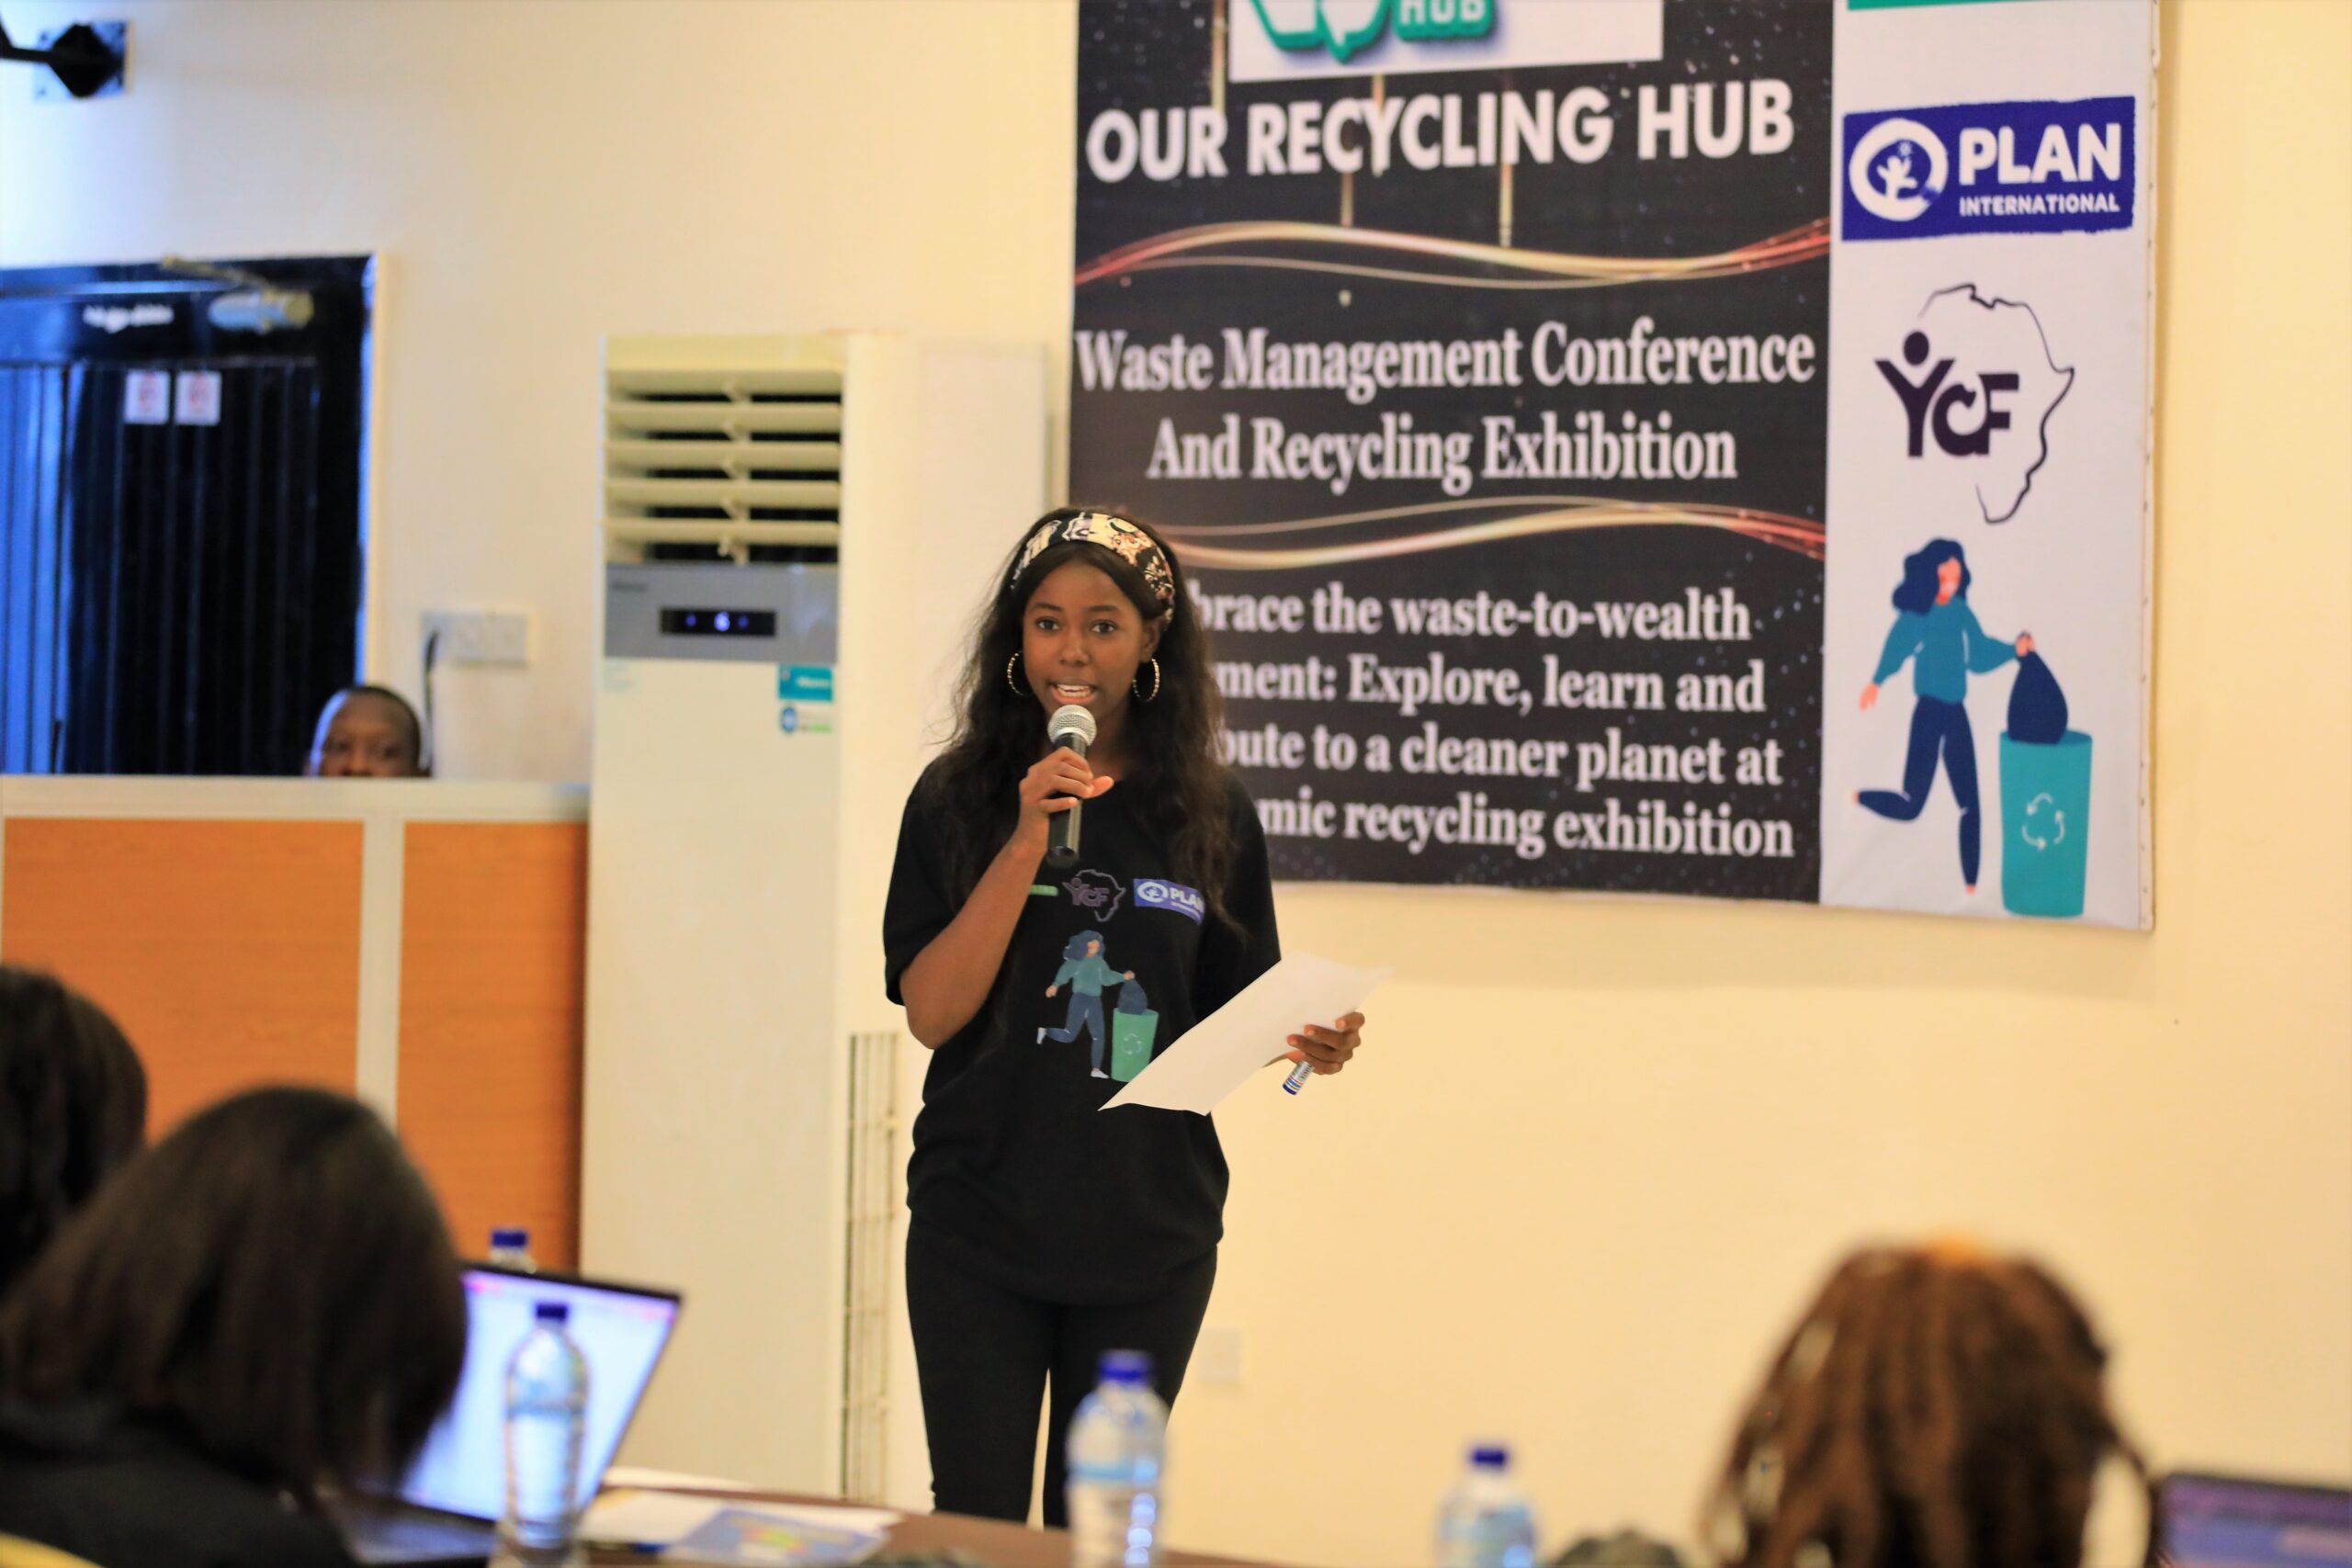 Lois, speaking about the importance of waste management. 